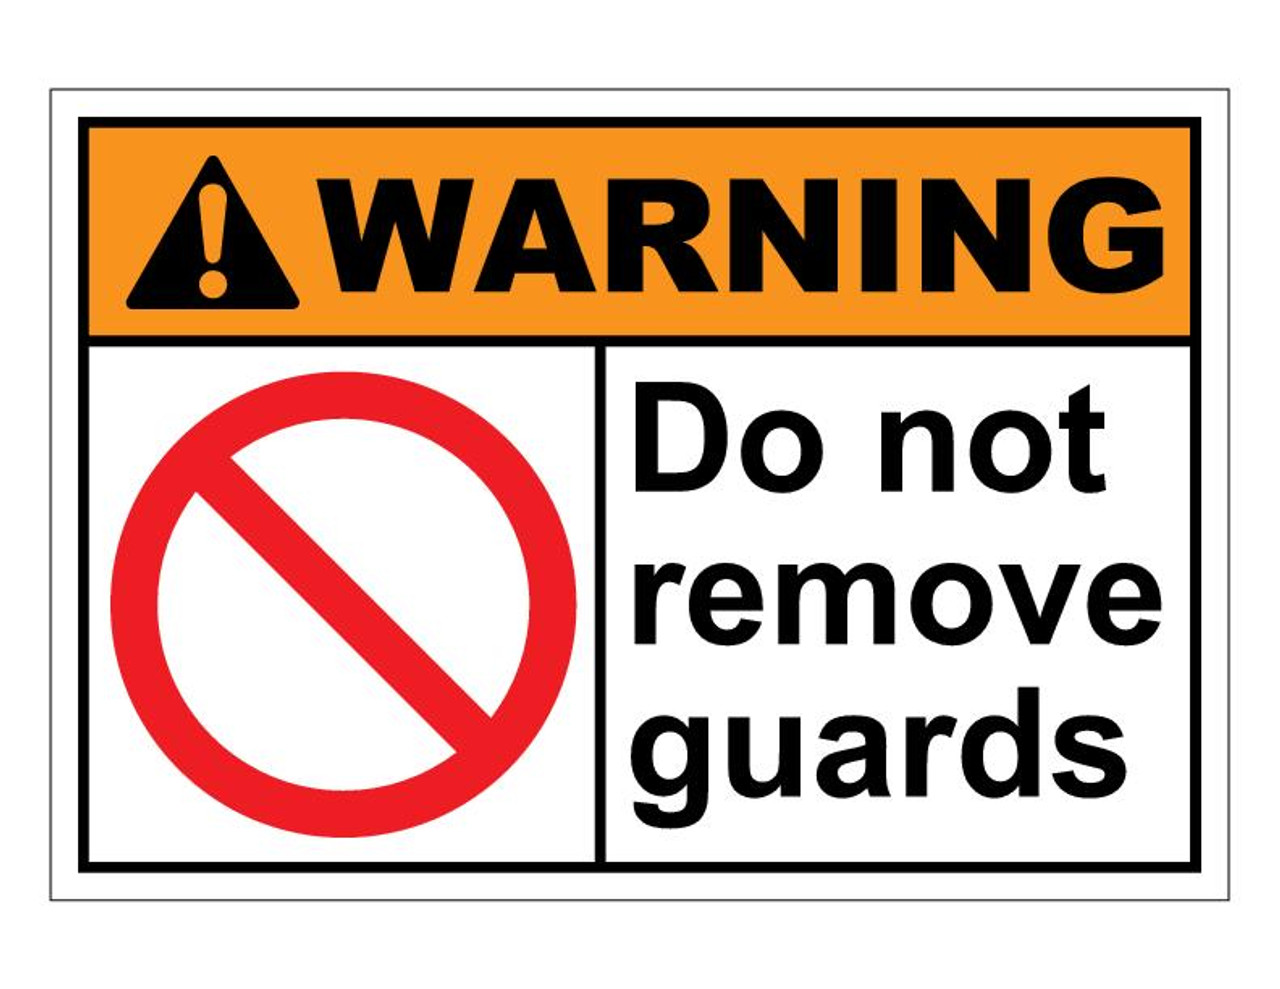 ANSI Warning Do Not Remove Guards